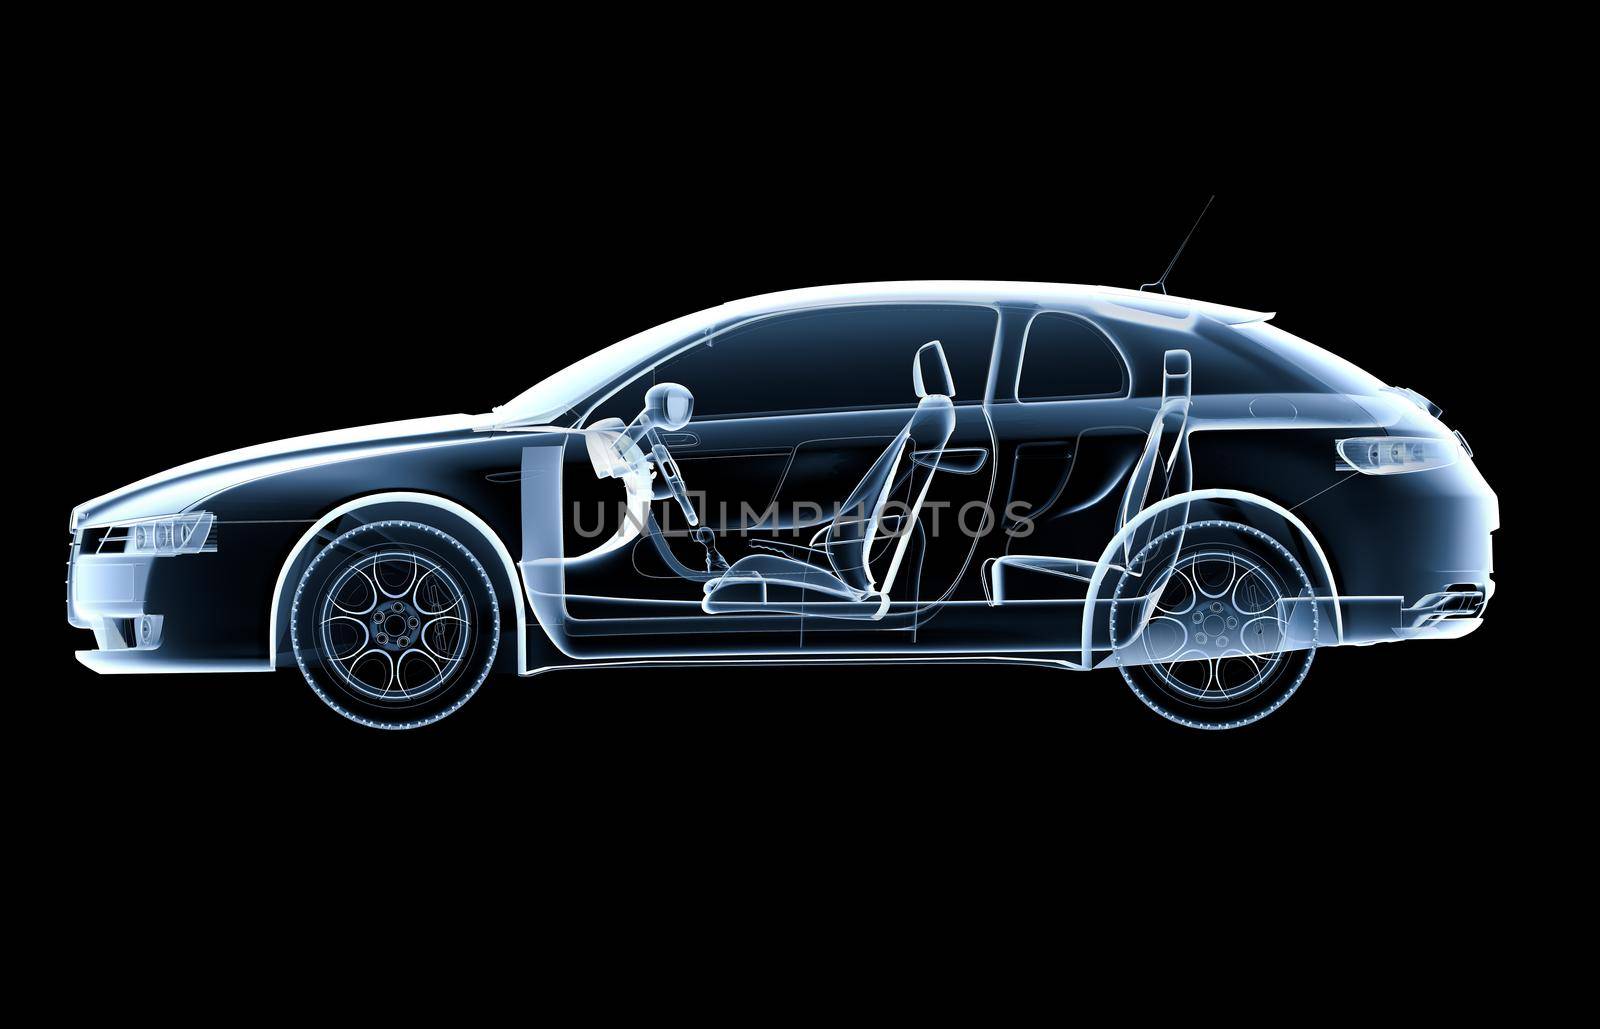 Lateral x-ray car on a black background - 3D illustration